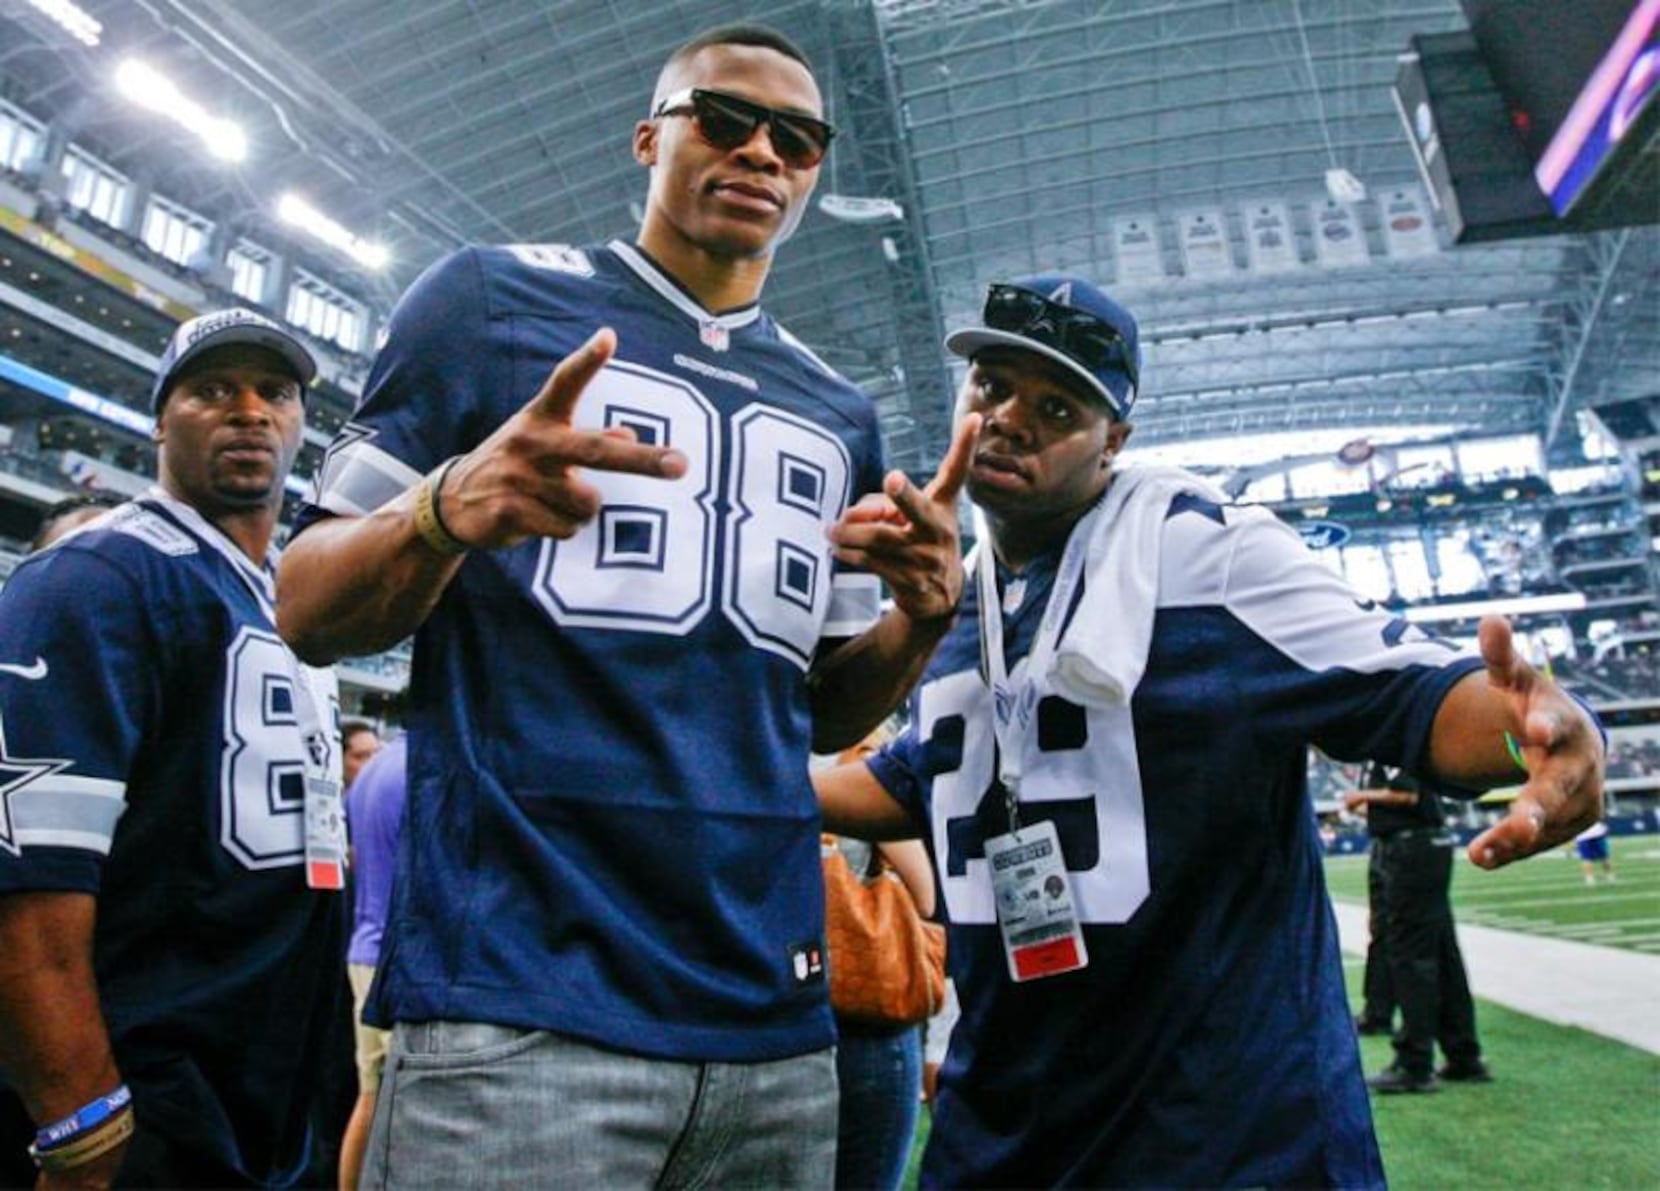 Celebrities who root for the Cowboys including Russell Westbrook